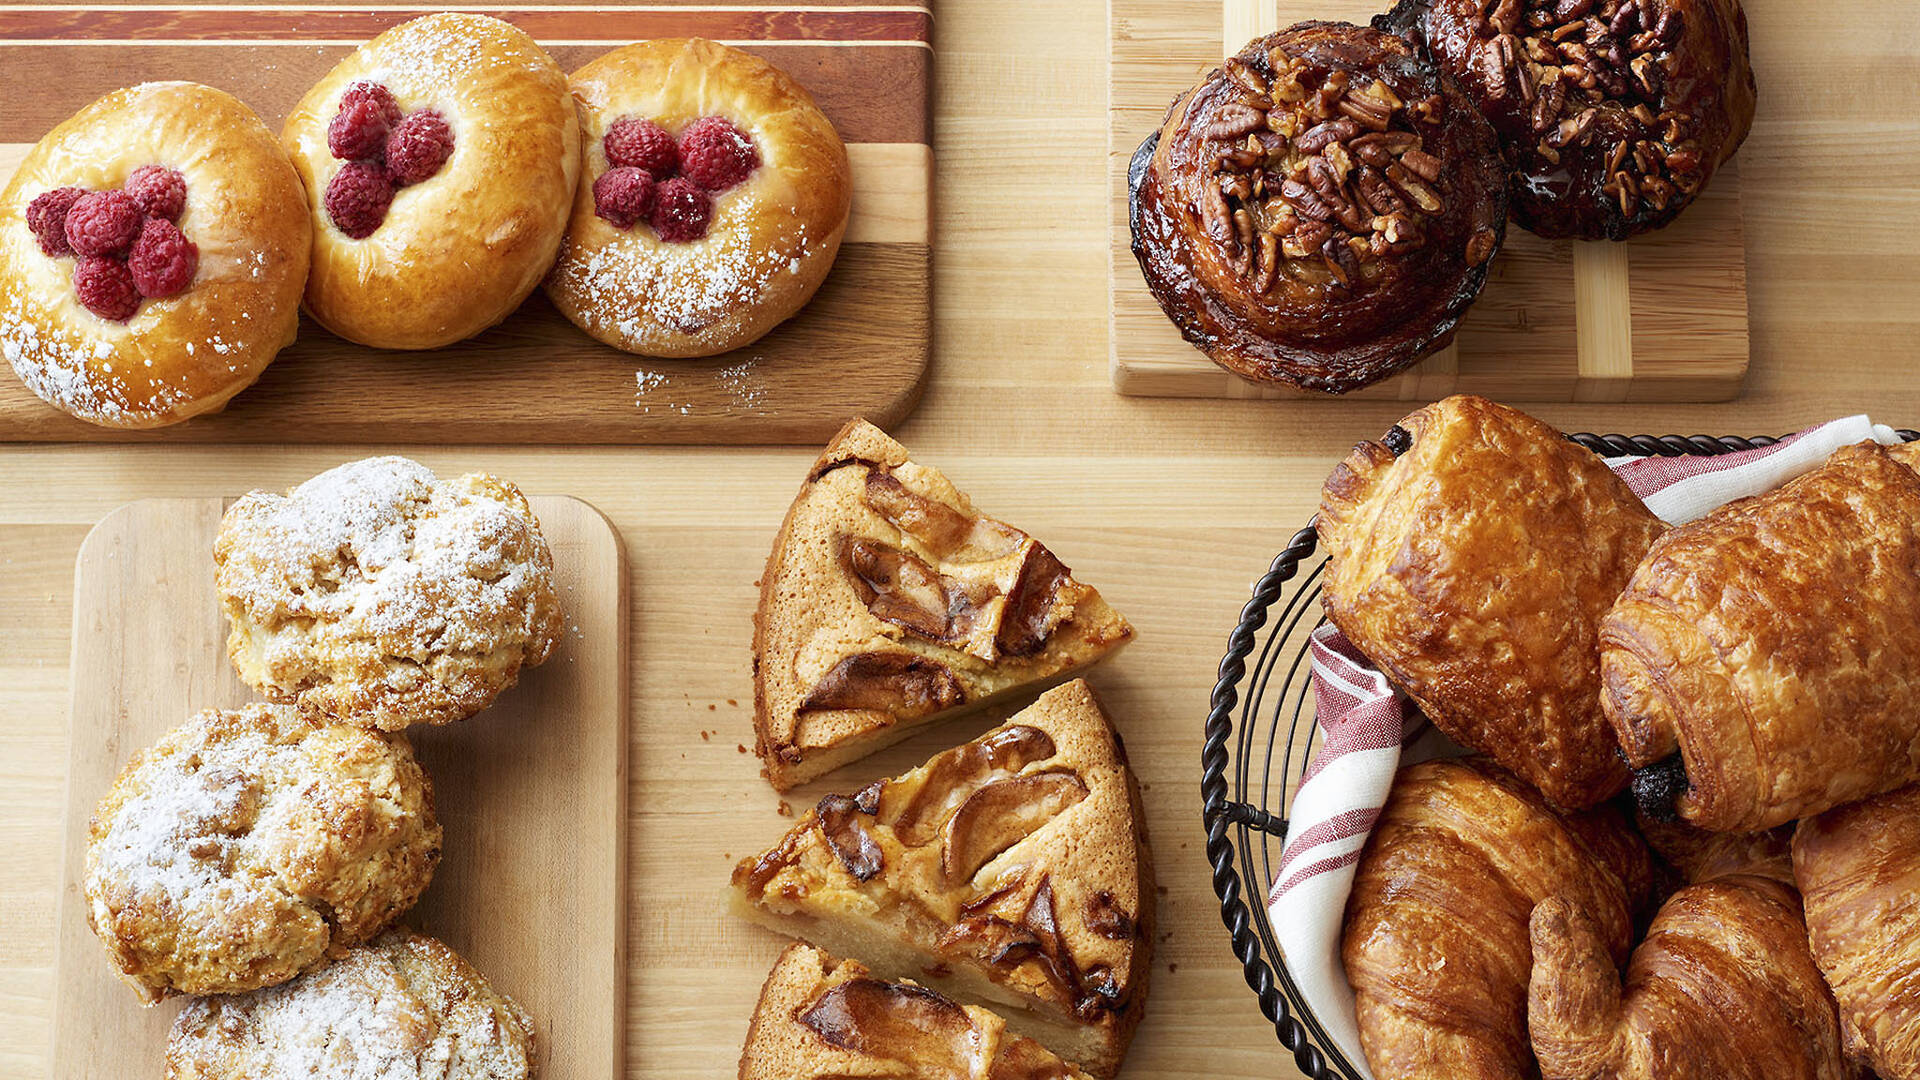 Bittersweet Pastry Shop | Restaurants in Lake View, Chicago